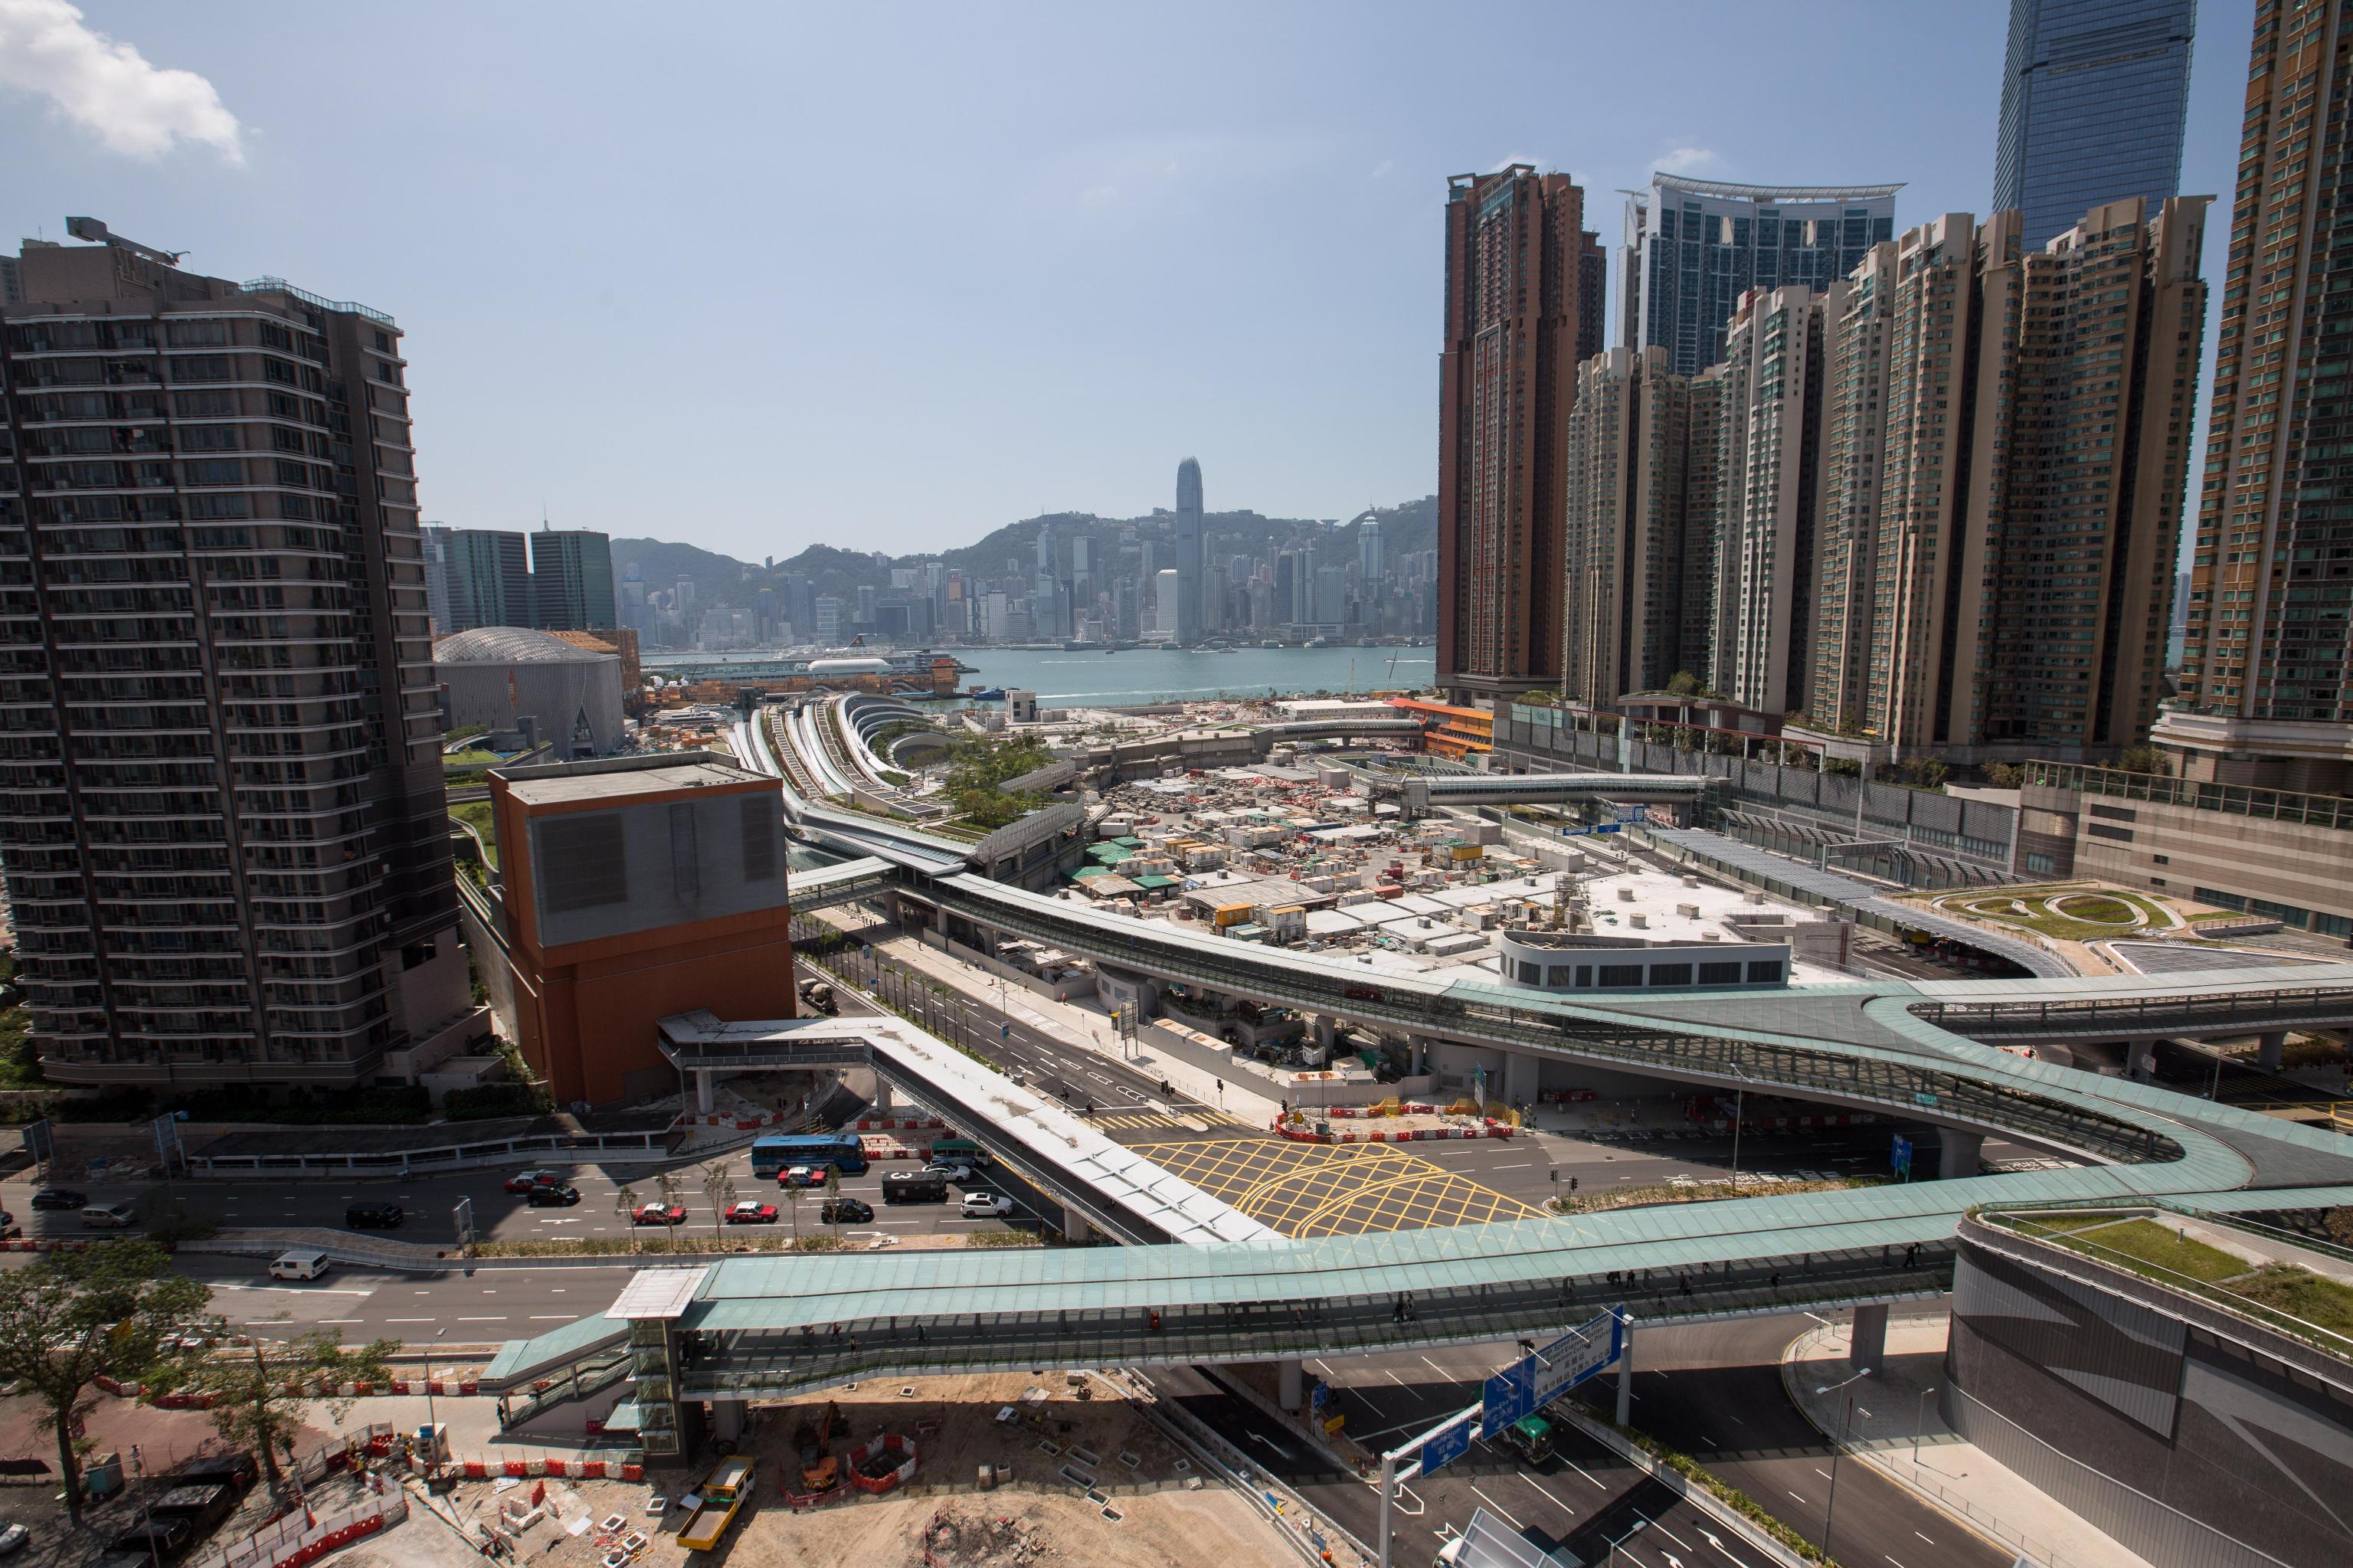 epa07036480 A general view showing the finished complex housing the West Kowloon of the Guangzhou-Shenzhen-Hong Kong Express Rail Link (C) in Hong Kong, China, 21 September 2018. The Hong Kong Section of the Guangzhou-Shenzhen-Hong Kong Express Rail Link will commence operation on 23 September 2018.  EPA/JEROME FAVRE